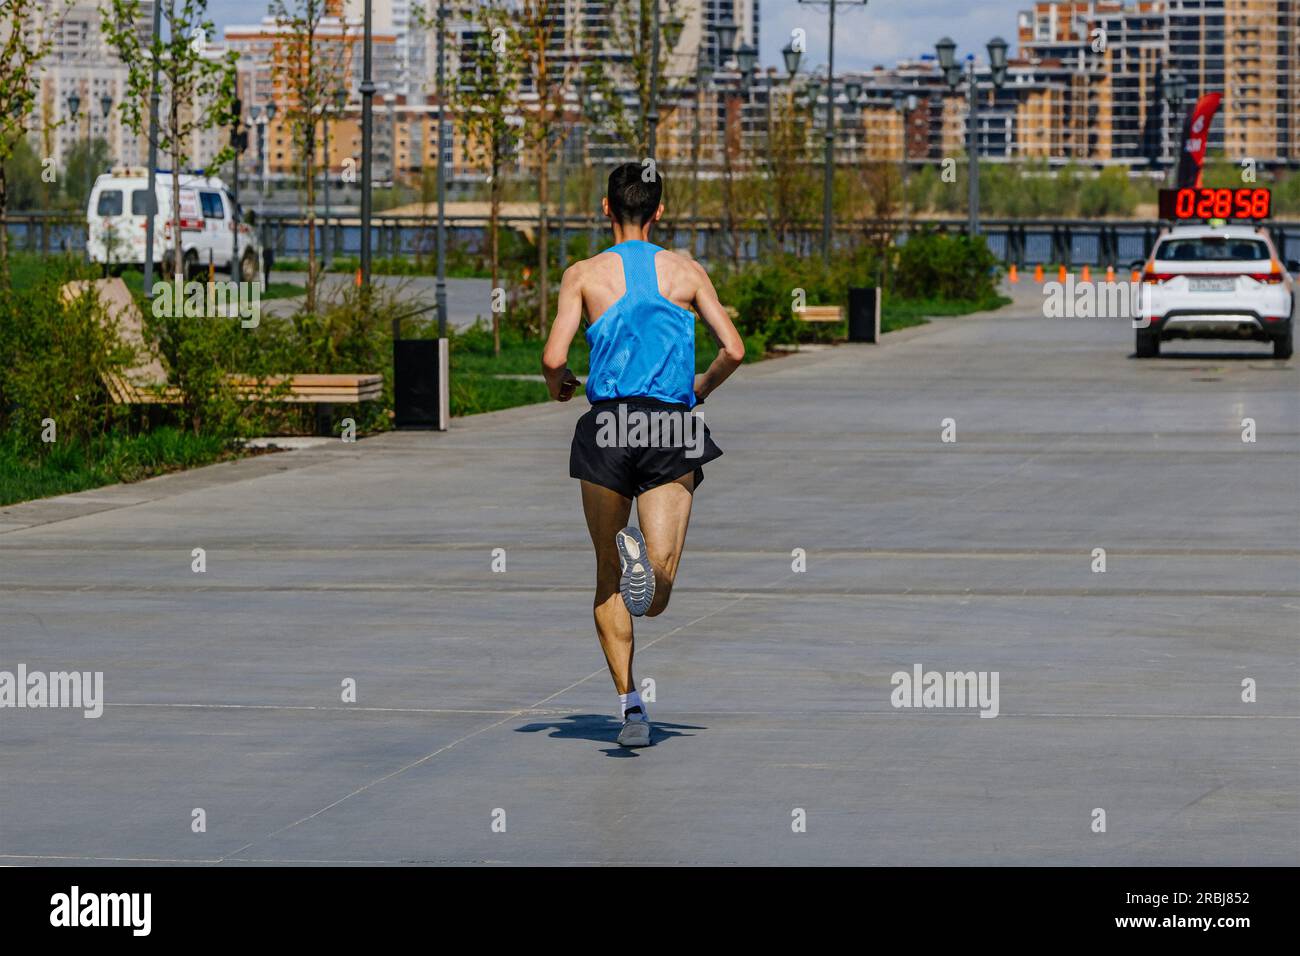 leading athlete runner running marathon race in park behind car time, summer sports event Stock Photo